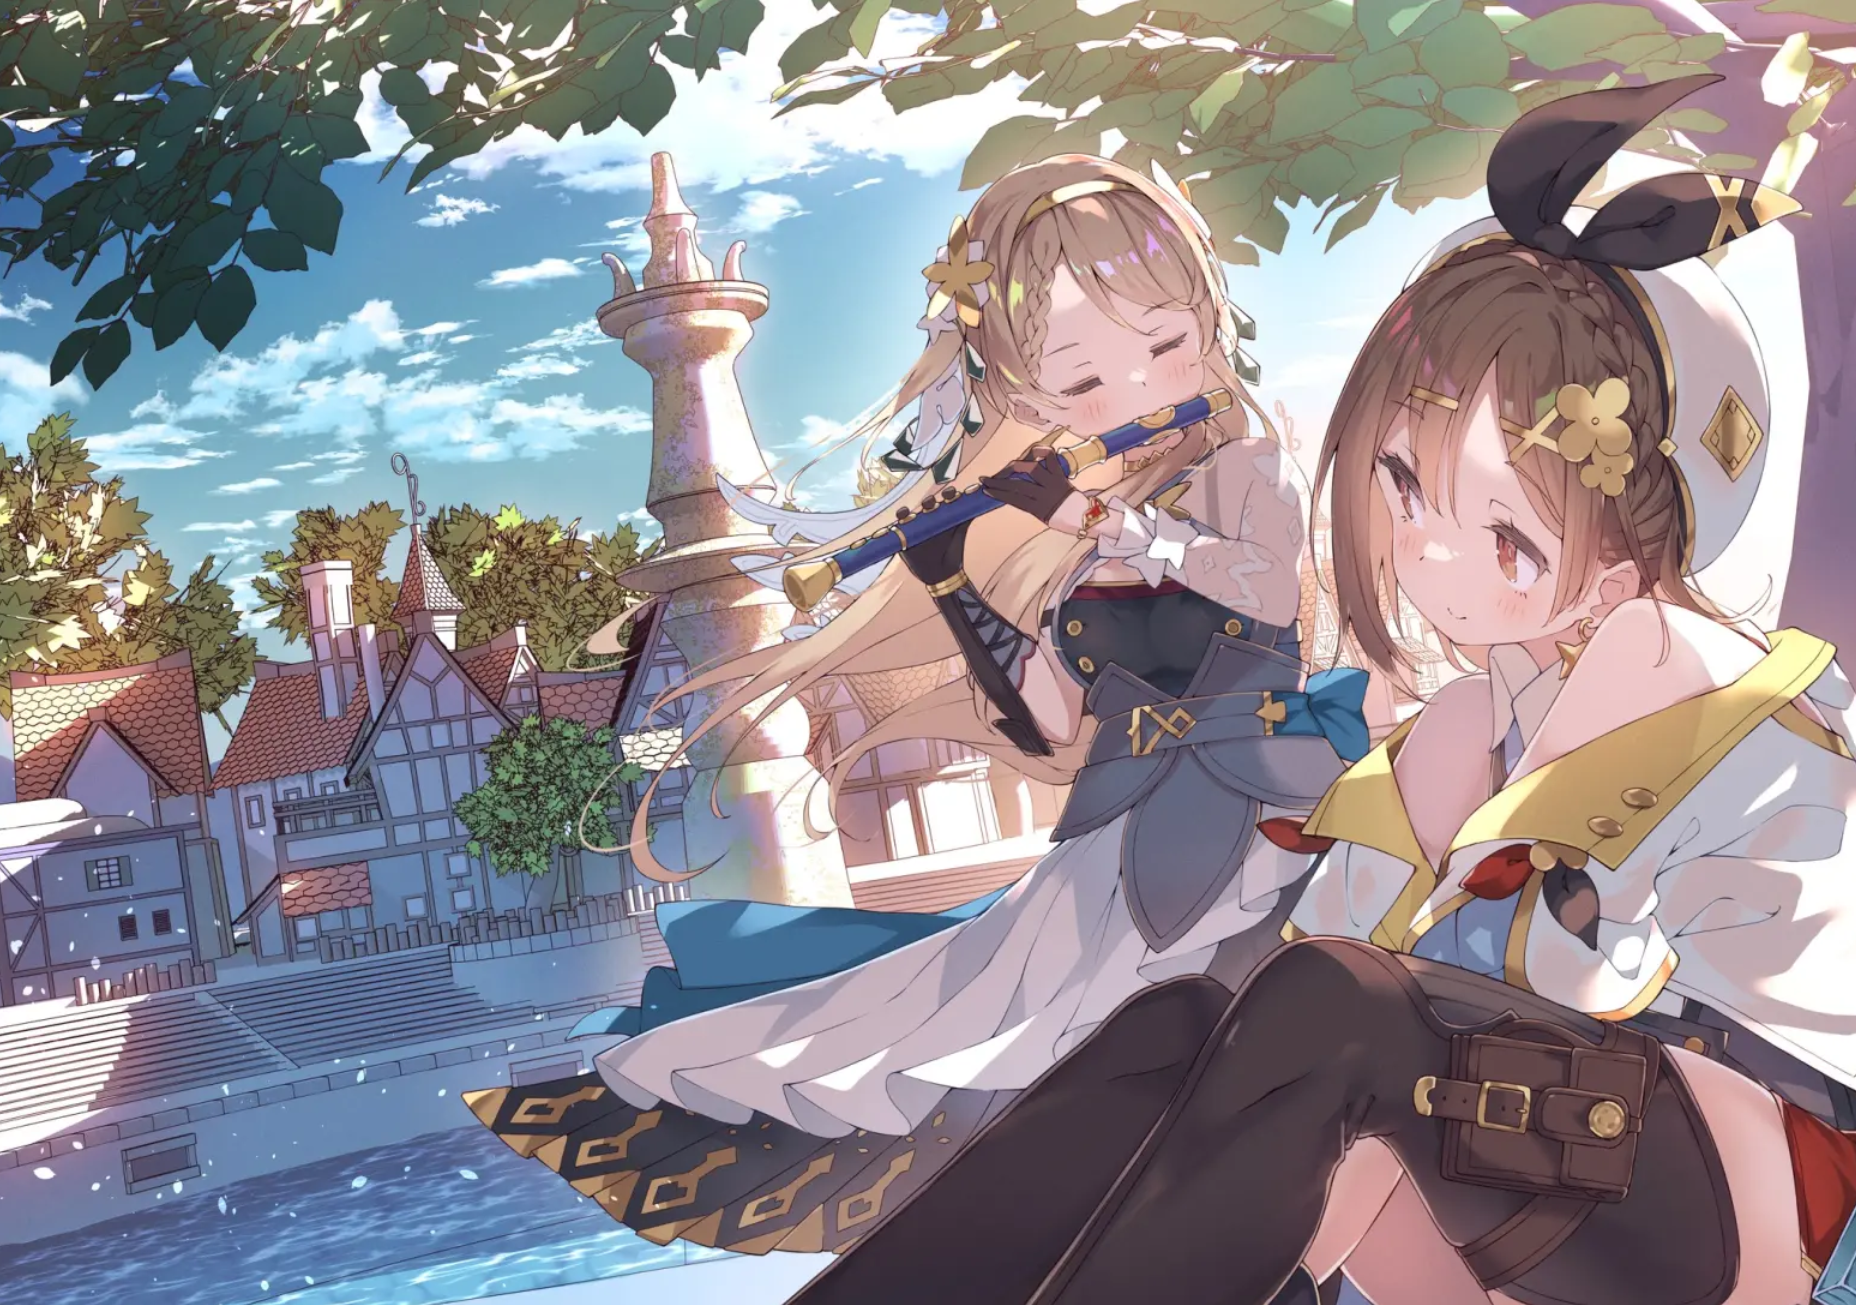 Atelier Ryza Anime Anime Girls Flute Leaves Water Brunette Braided Hair Smiling Gloves Clouds Sky Vi 1856x1305